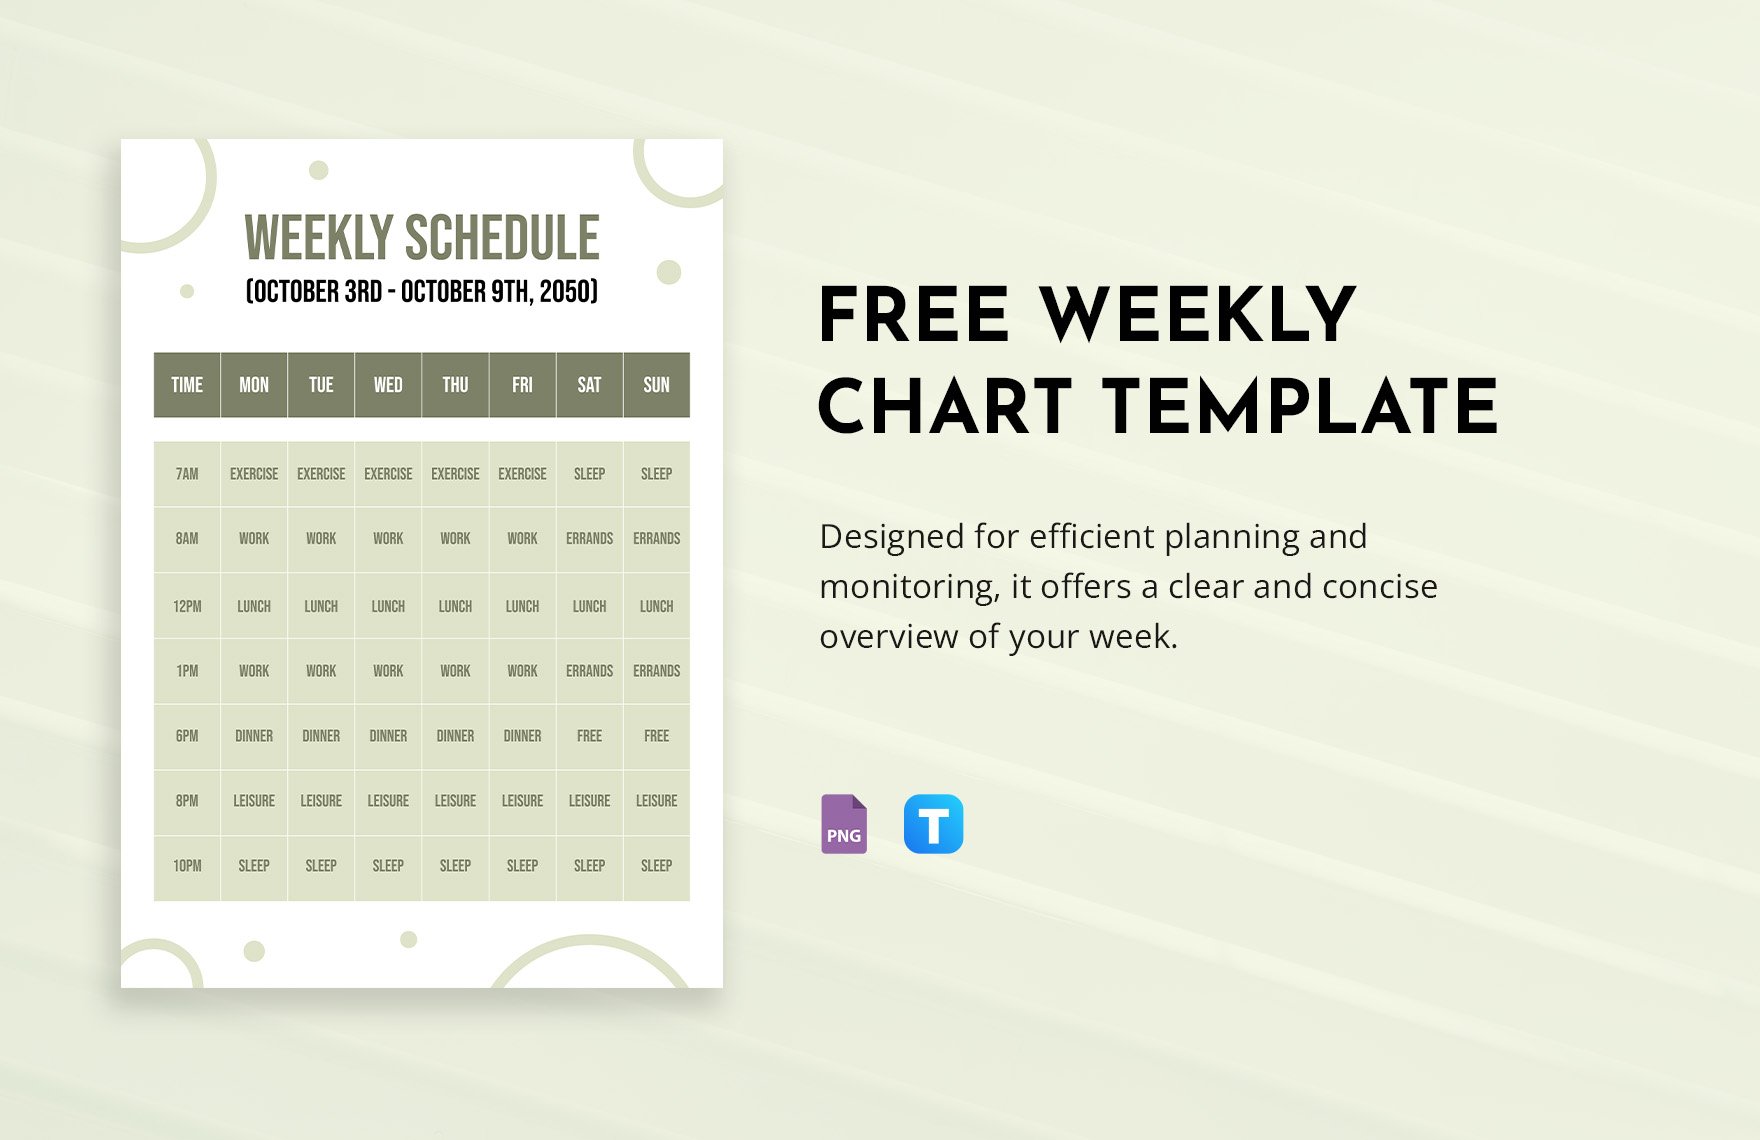 Free Weekly Chart Template